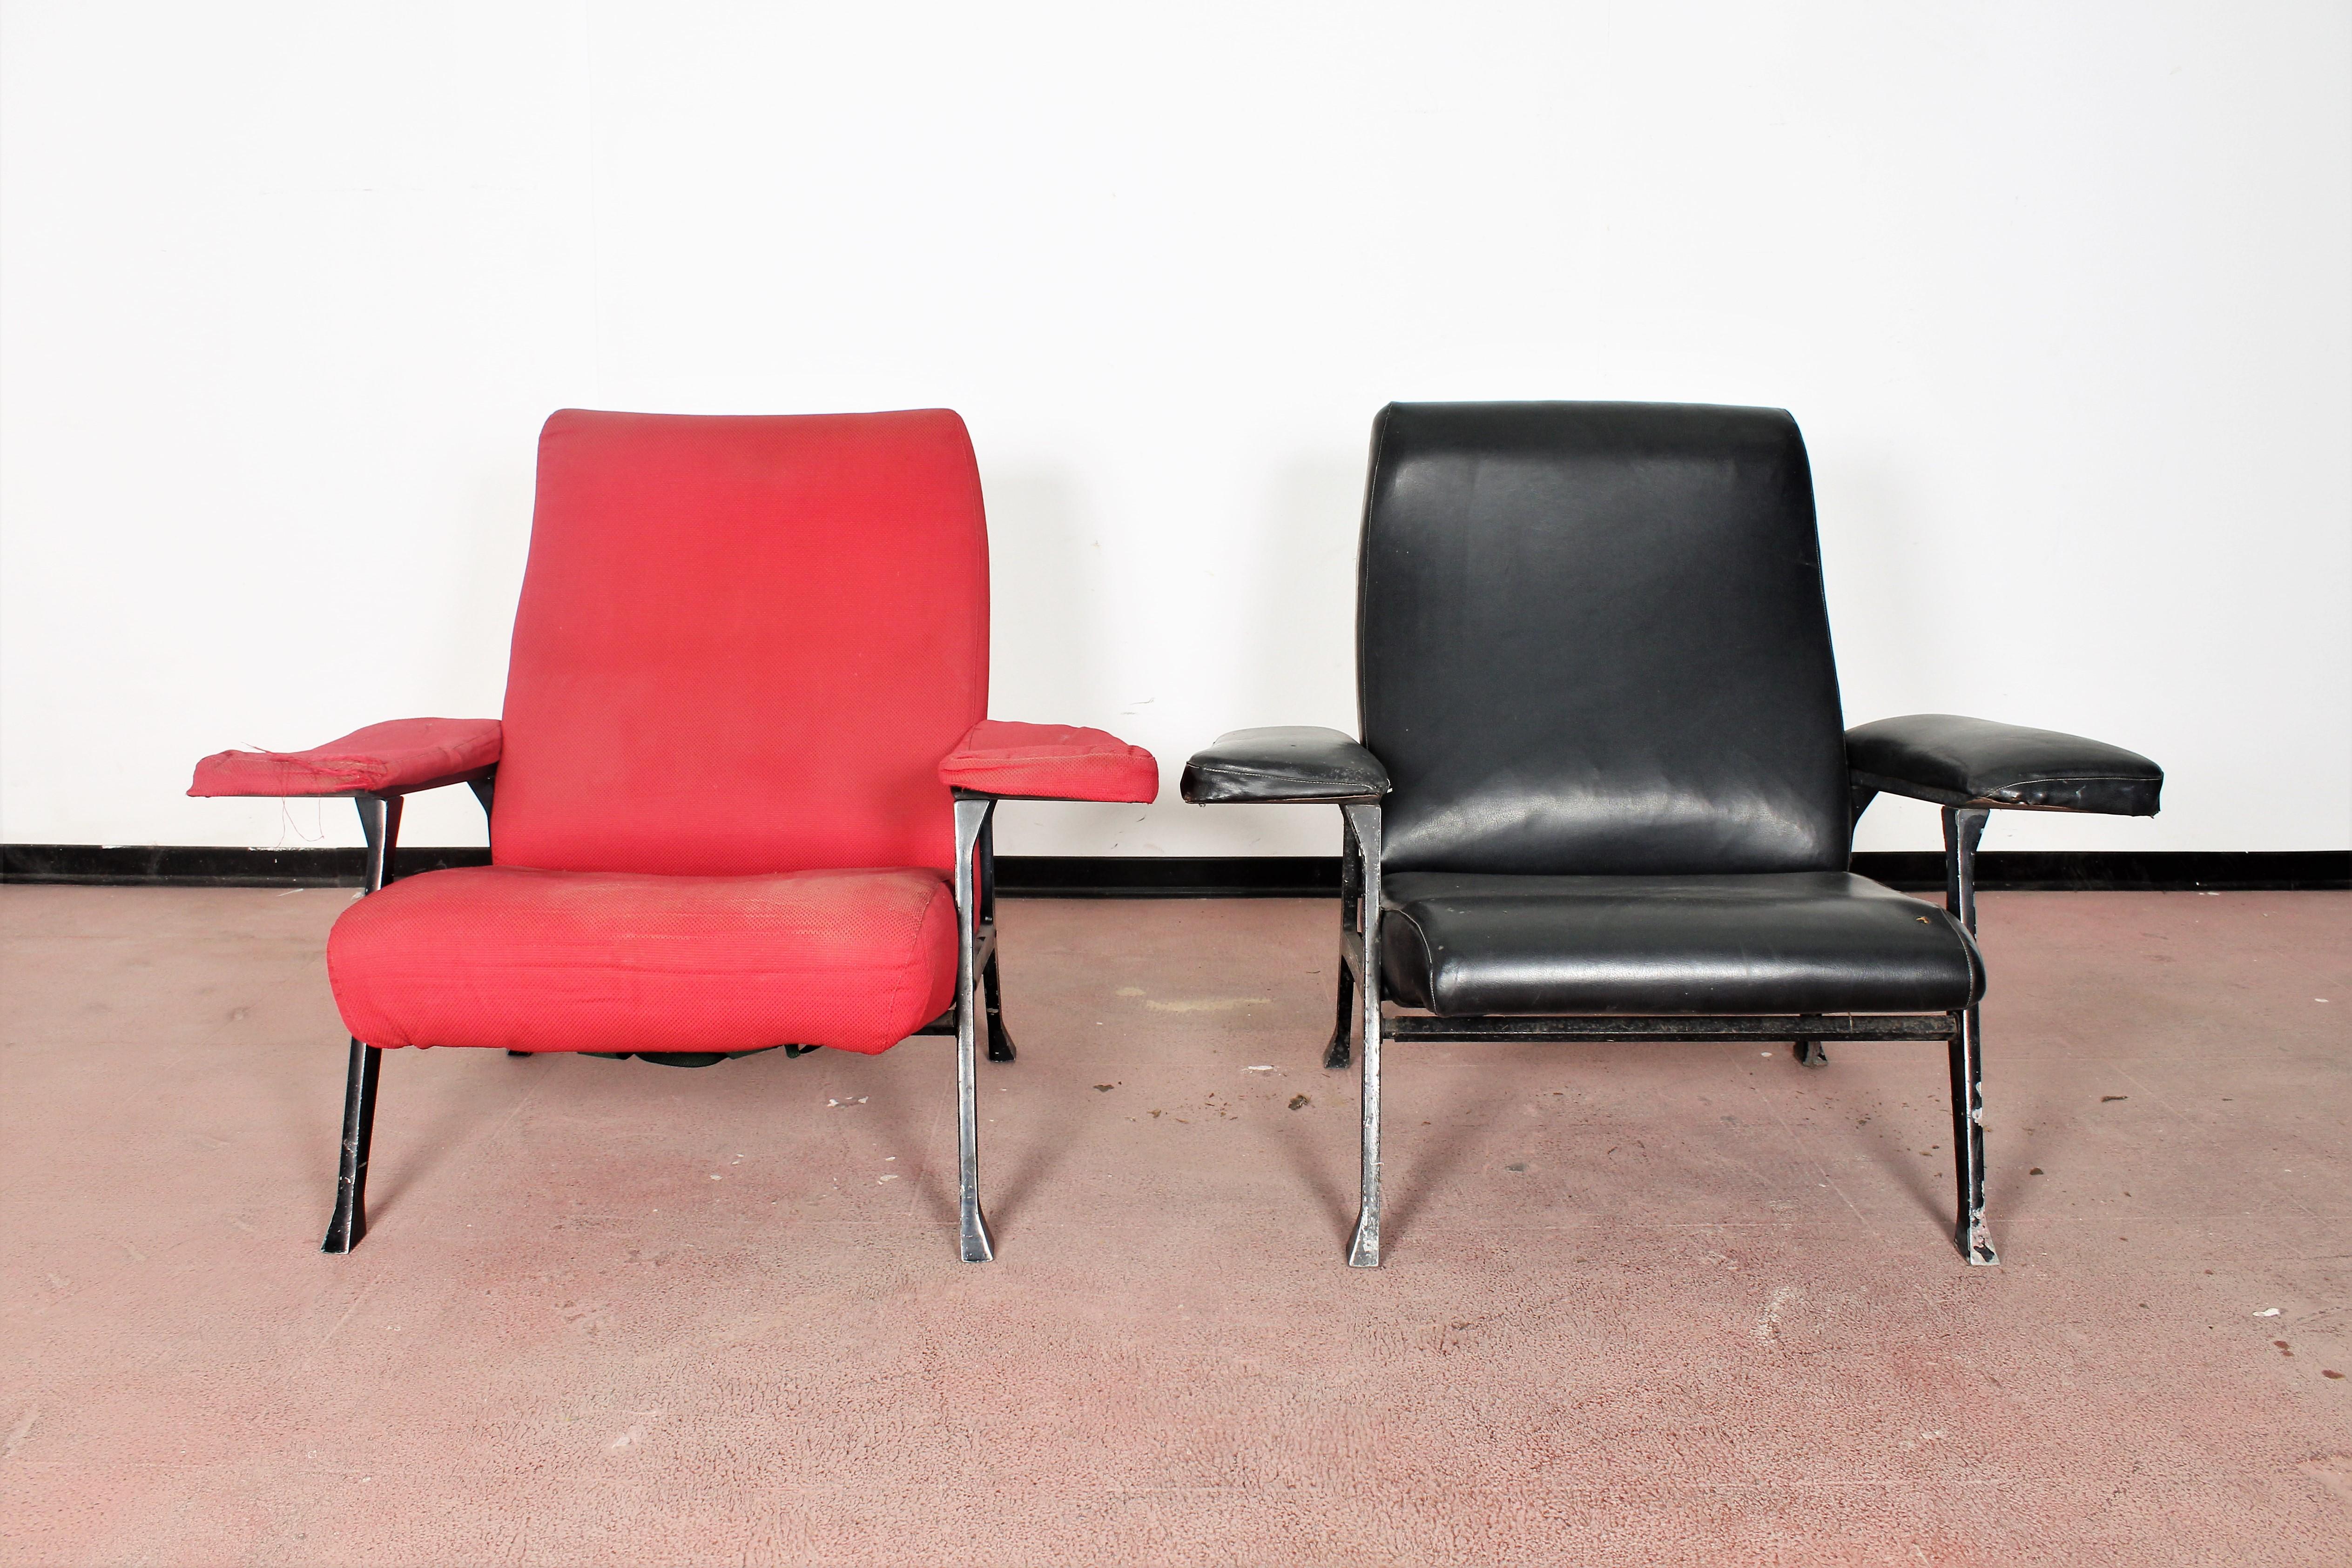 Roberto Menghi by Arflex, Italy, 1958
two armchairs in stamped metal, foam rubber padding on nastrocord.
One of the two armchairs is covered in red fabric, while the other one in black skai leather.
Wear consistent with age and use.

literary